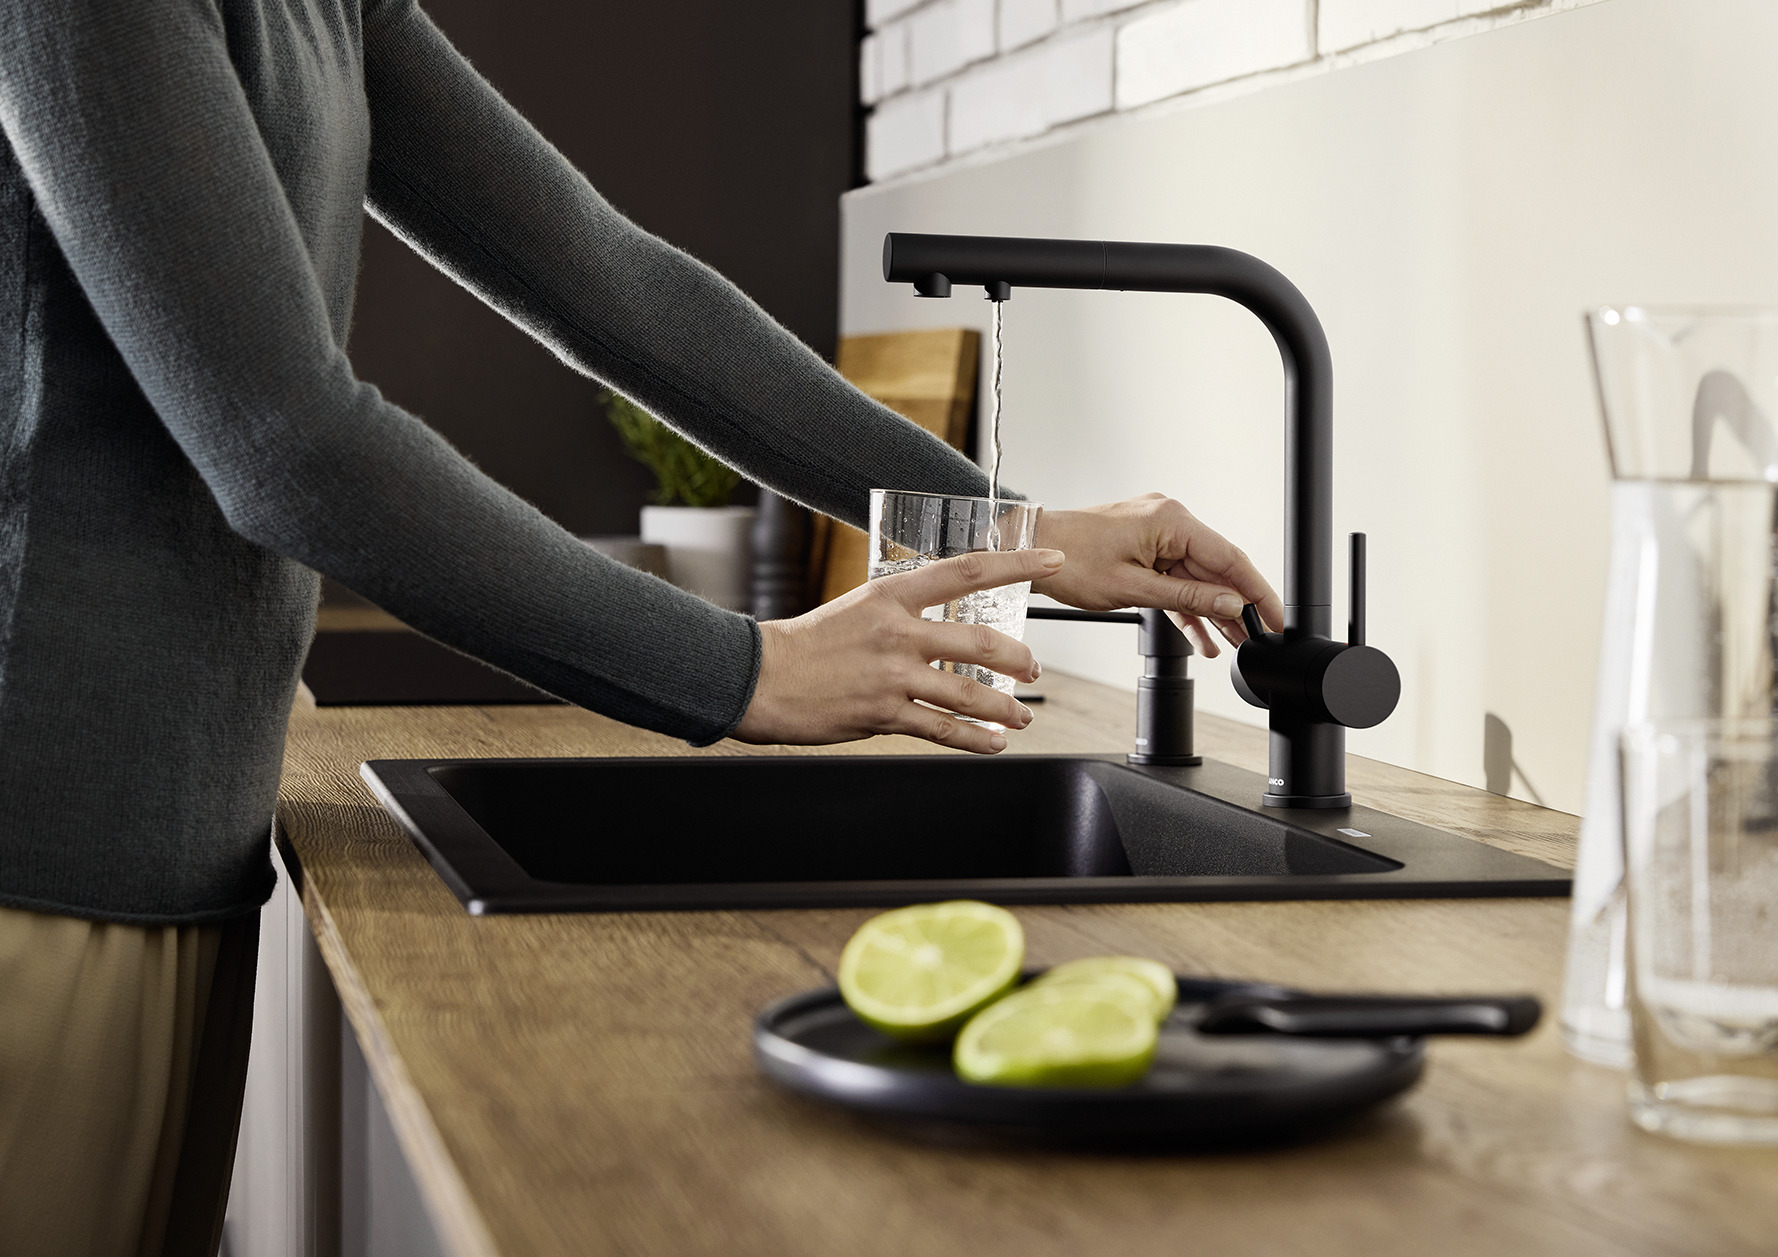 The Adon Silgranit sink, which features a high drainer edge, is good for protecting kitchen worktops